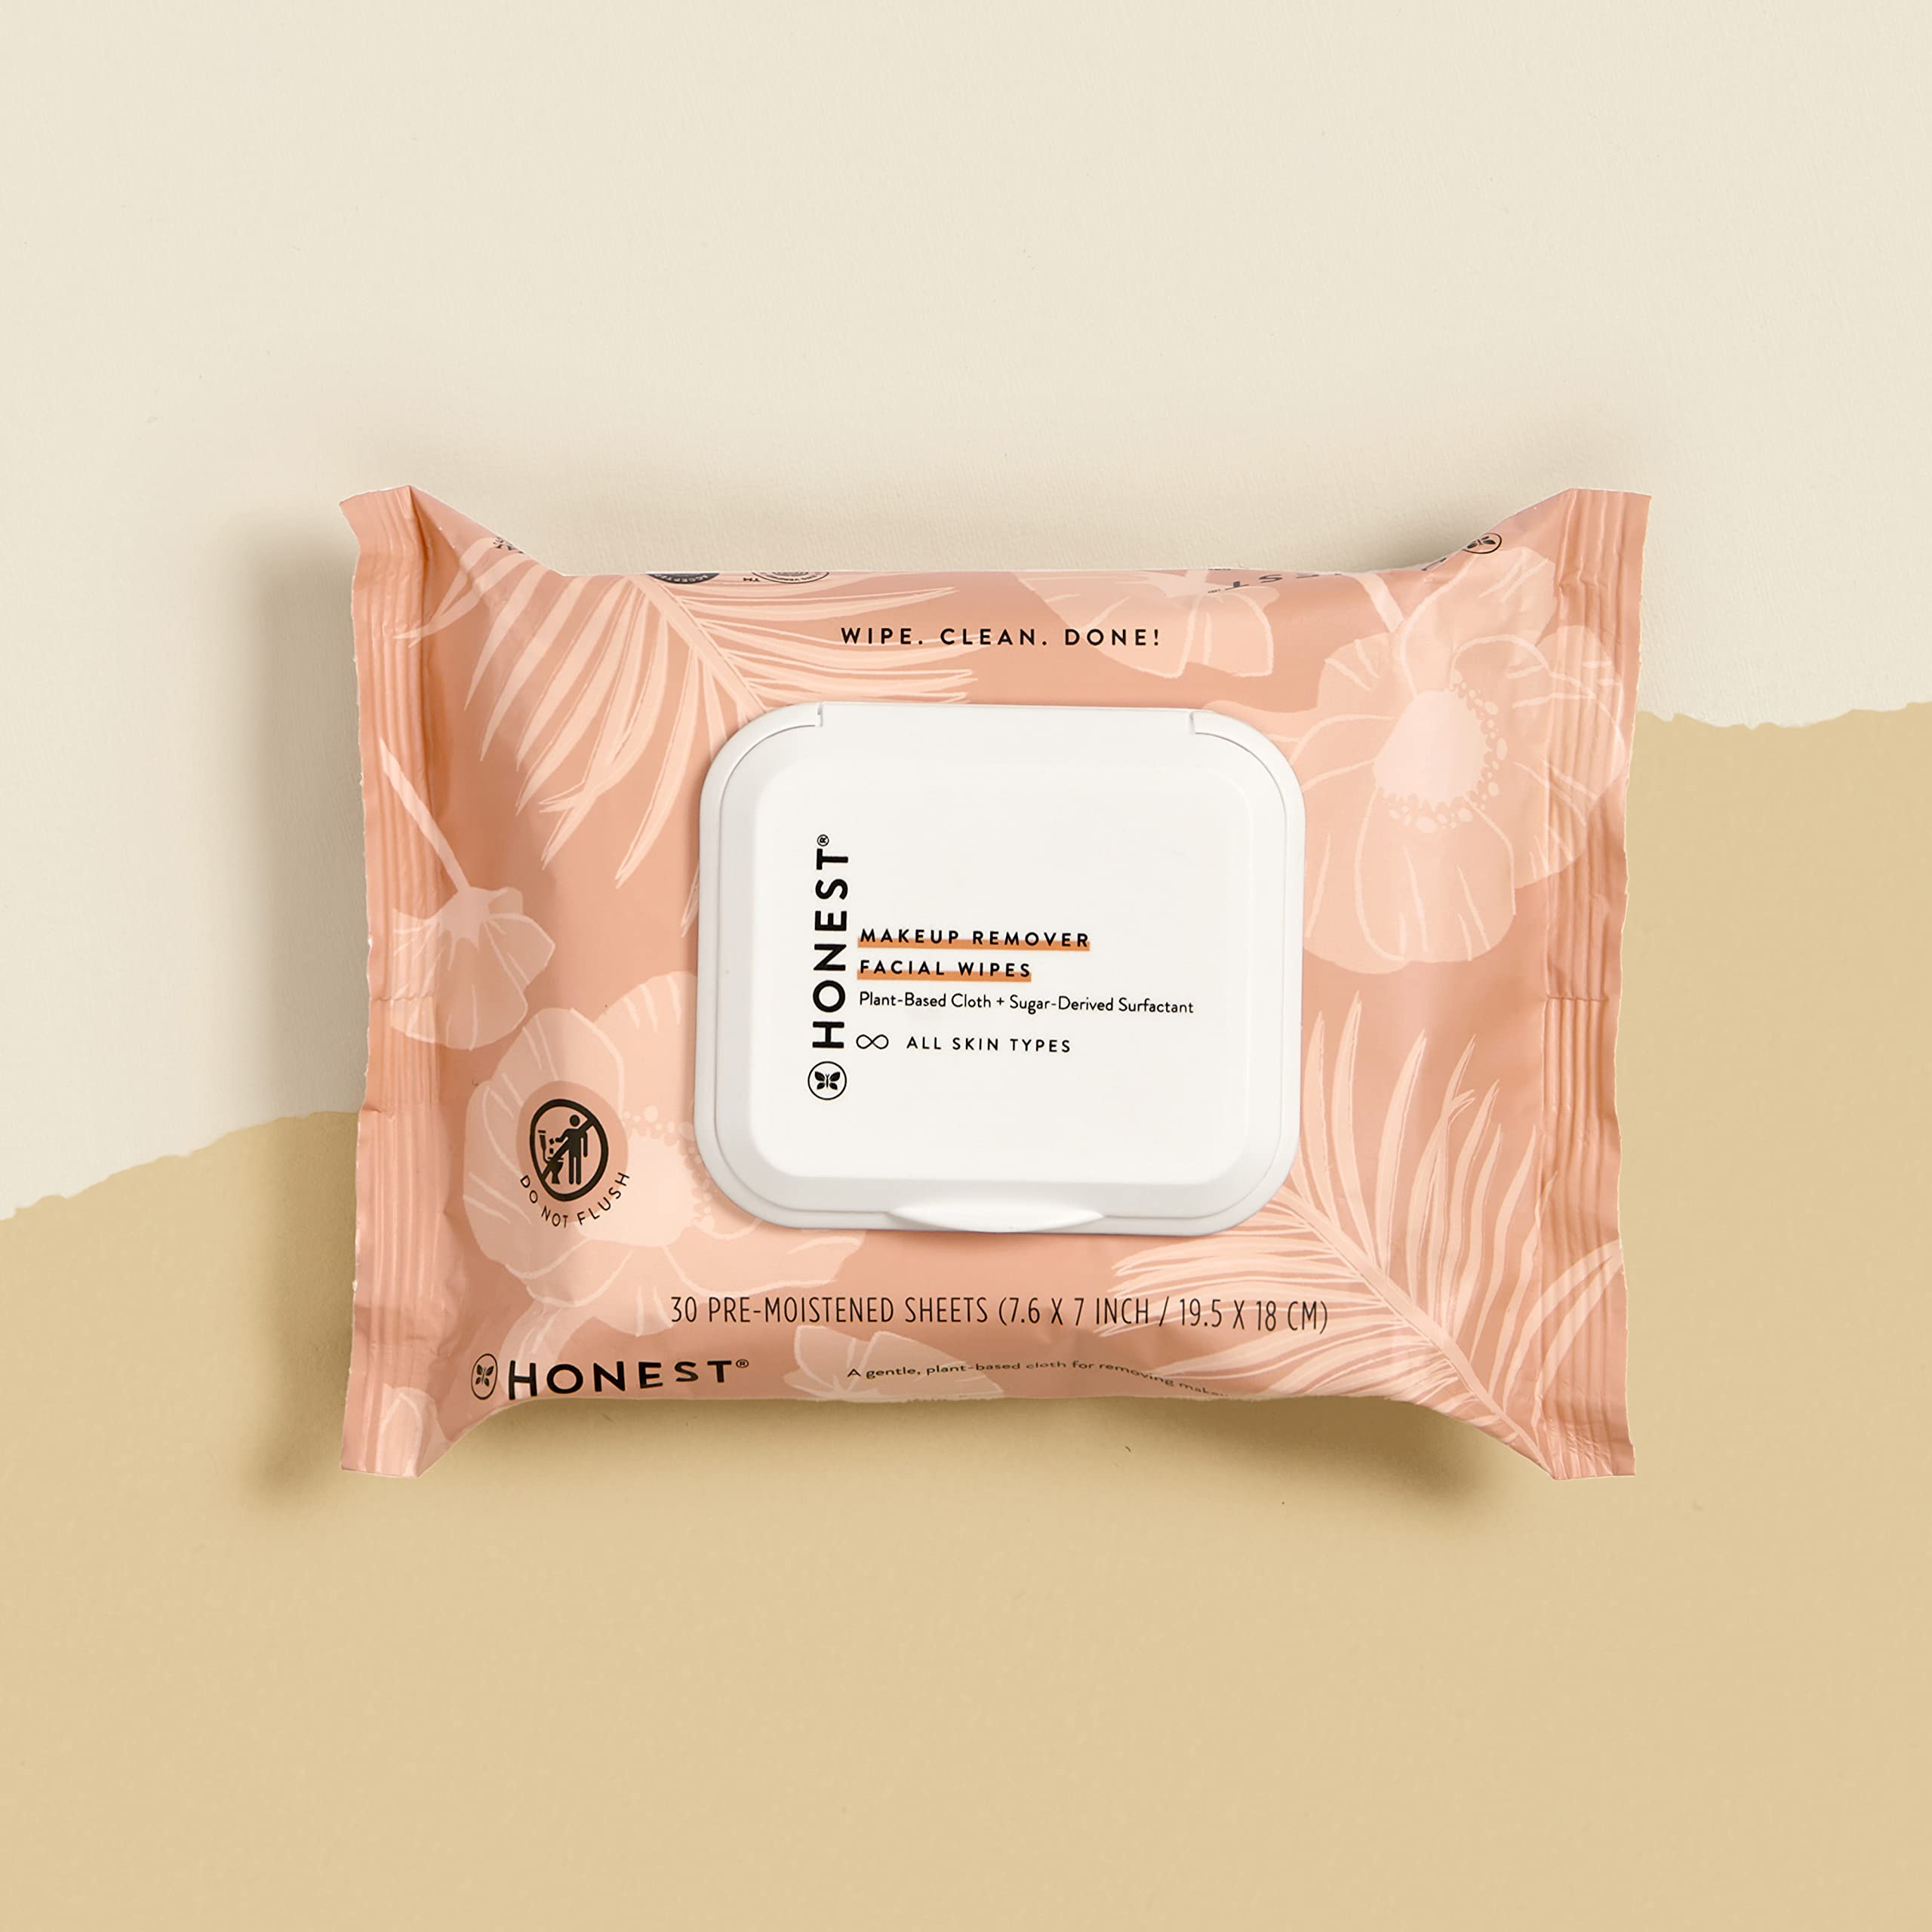 Honest Beauty Makeup Remover Facial Wipes | EWG Verified, Plant-Based, Hypoallergenic | 30 Count